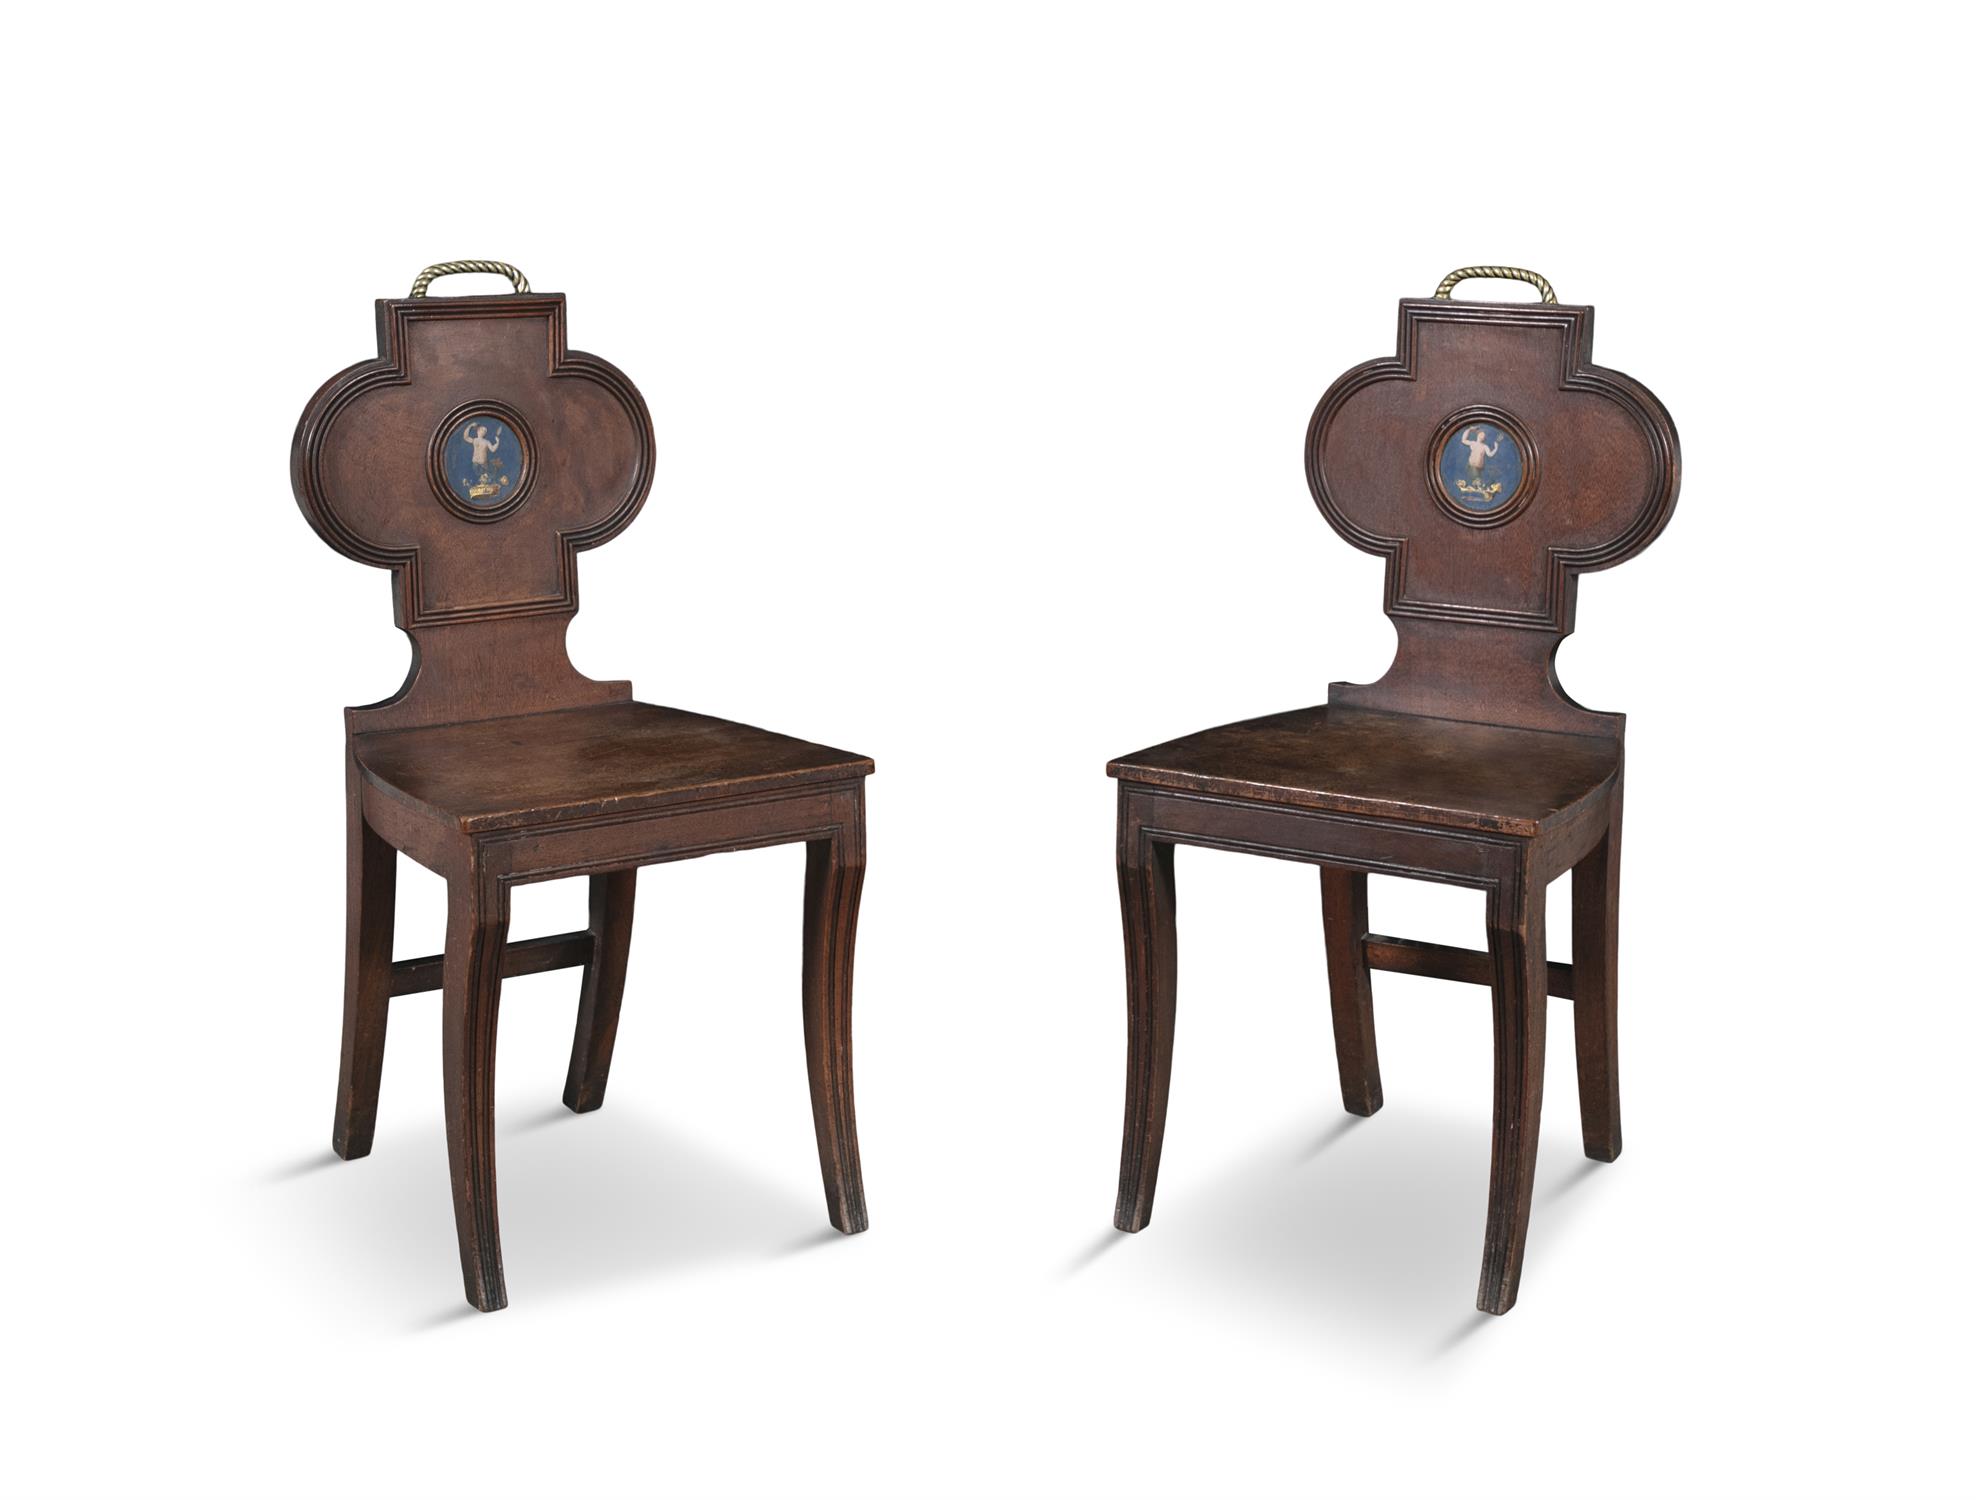 A PAIR OF REGENCY MAHOGANY HALL CHAIRS, each quatrefoil back with brass rope-twist handles